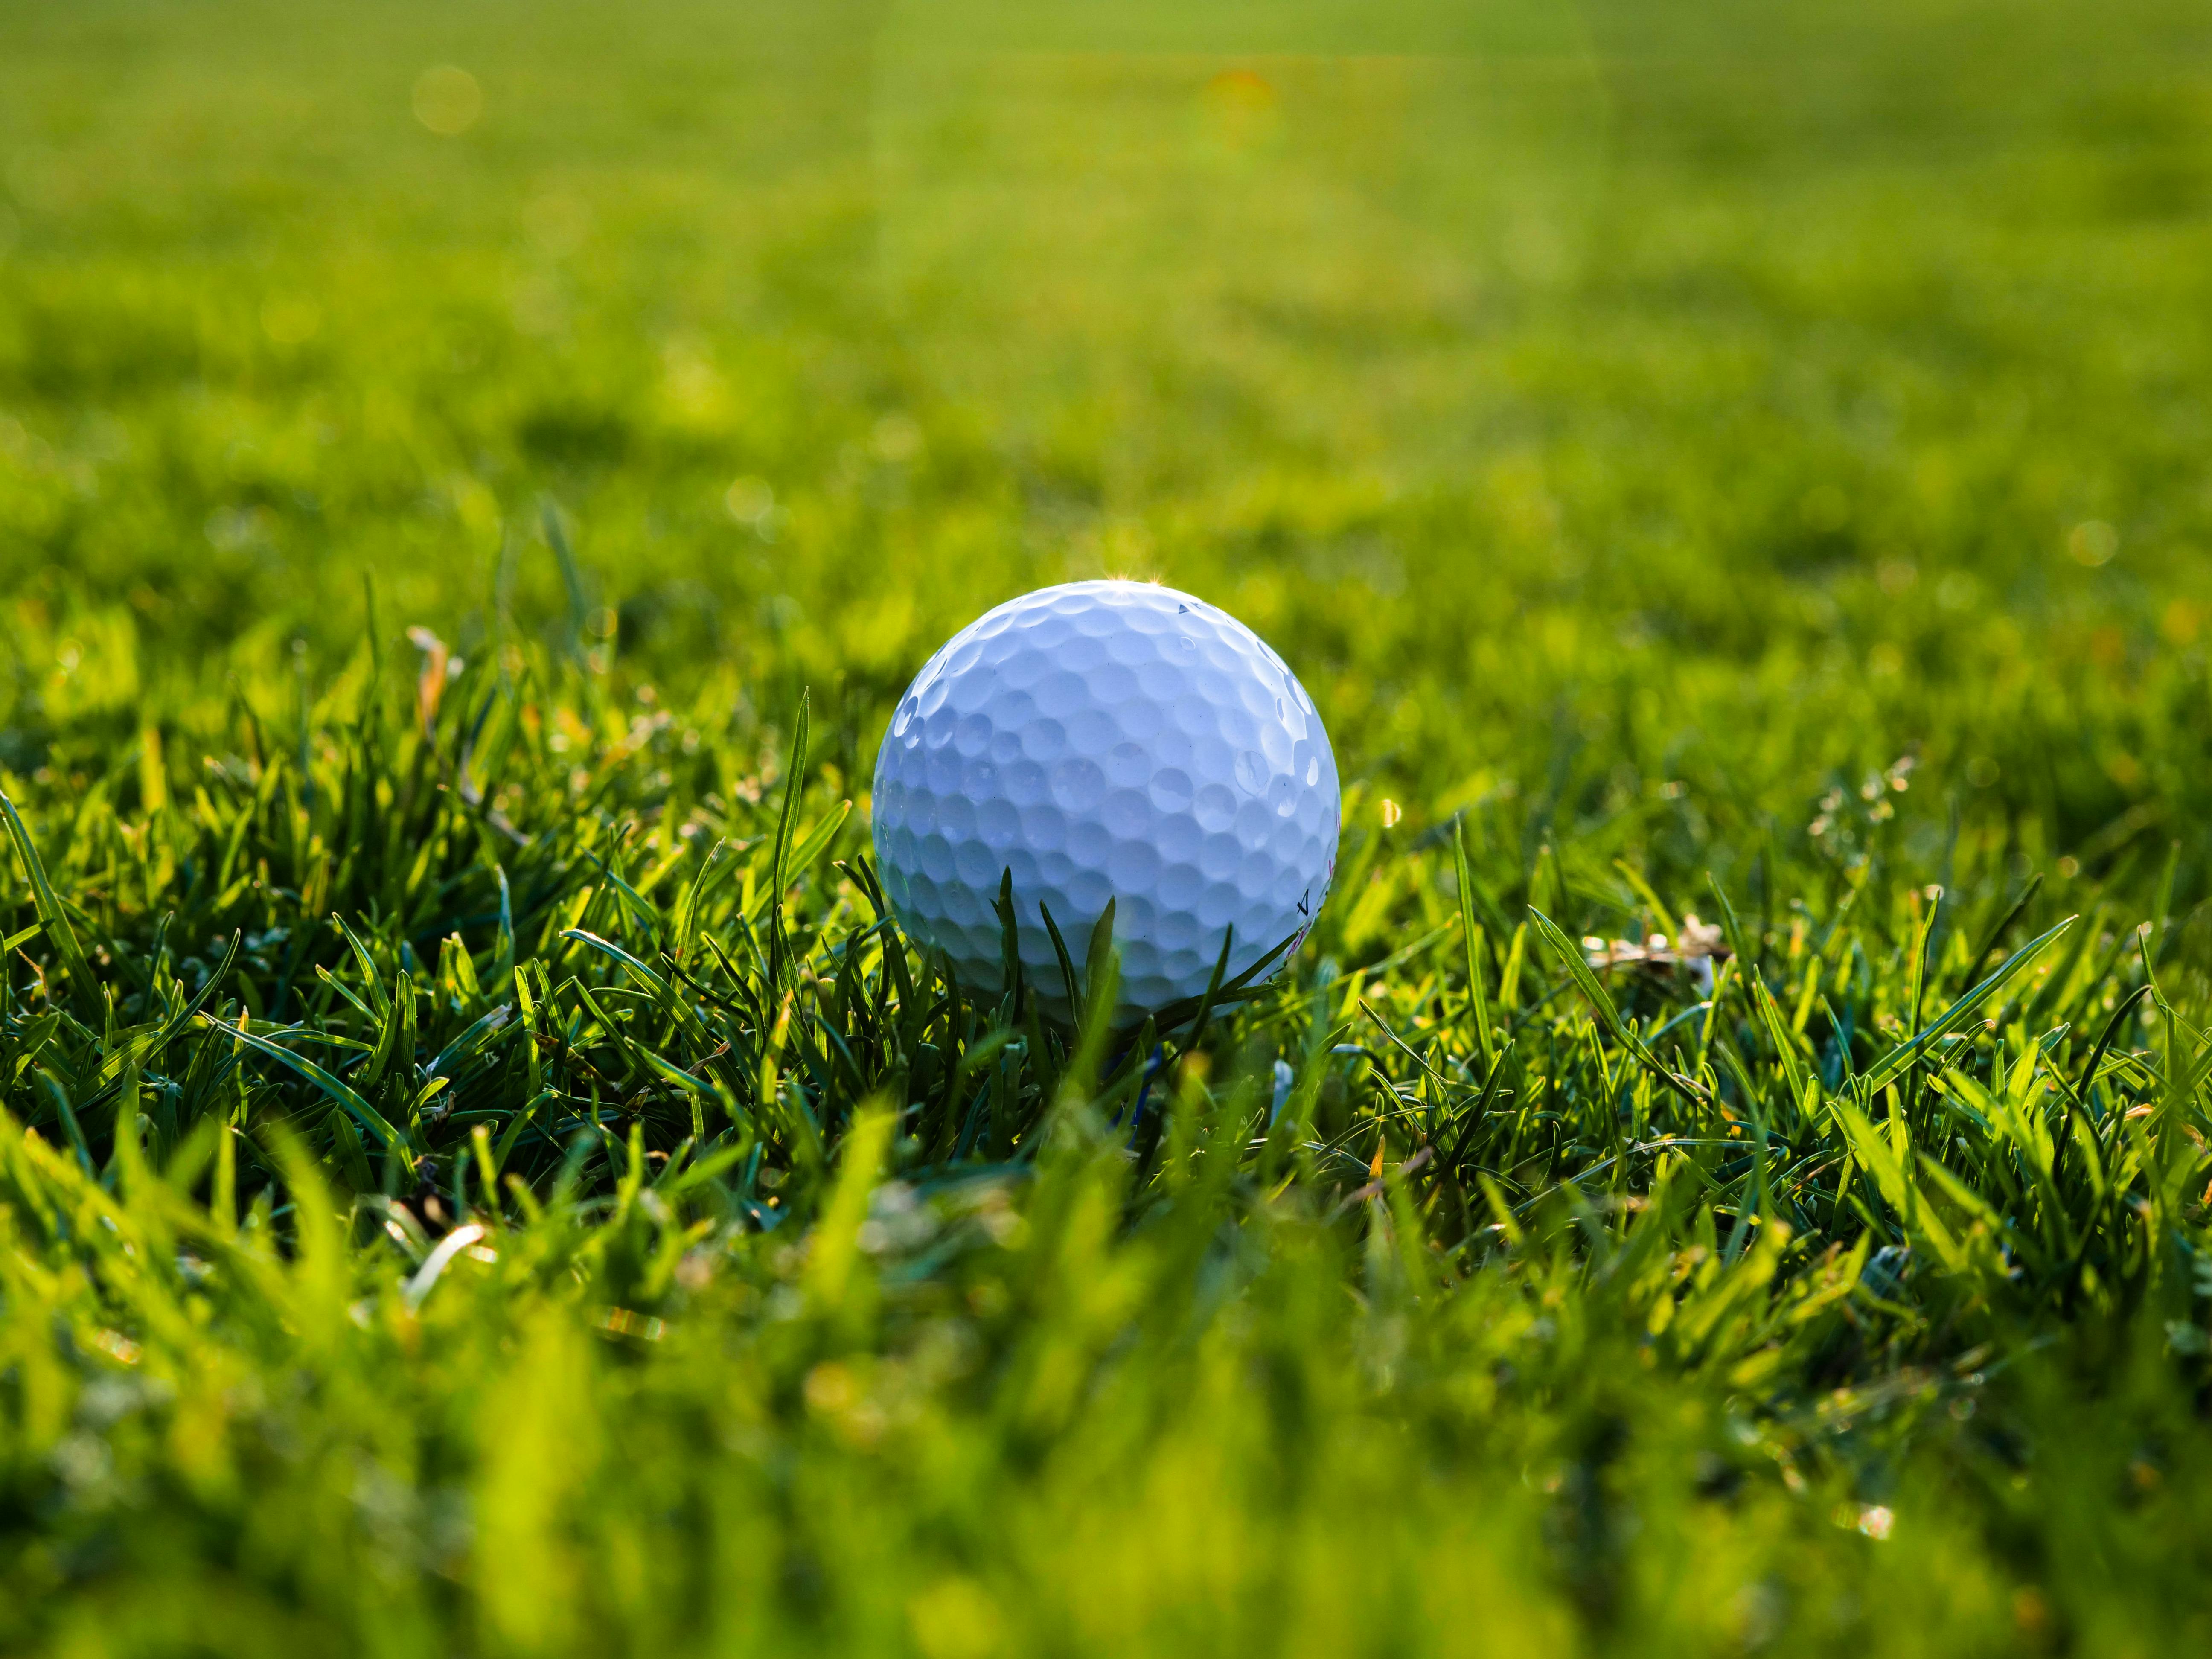 A White Golf Ball on the Green Grass · Free Stock Photo